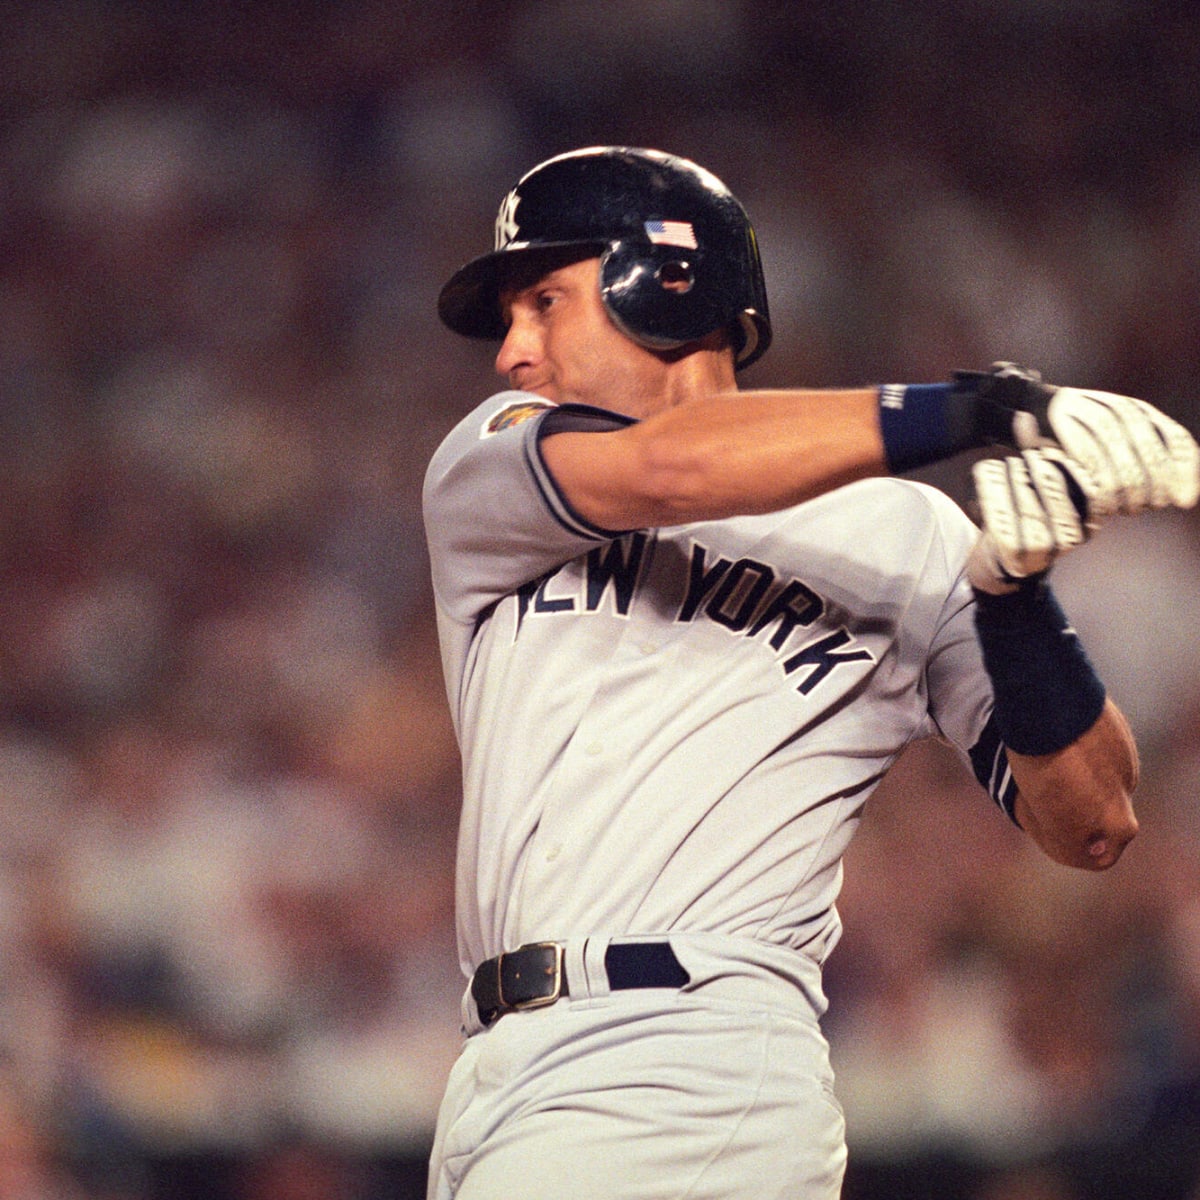 This Day in Yankees History: The trade that sent O'Neill to the